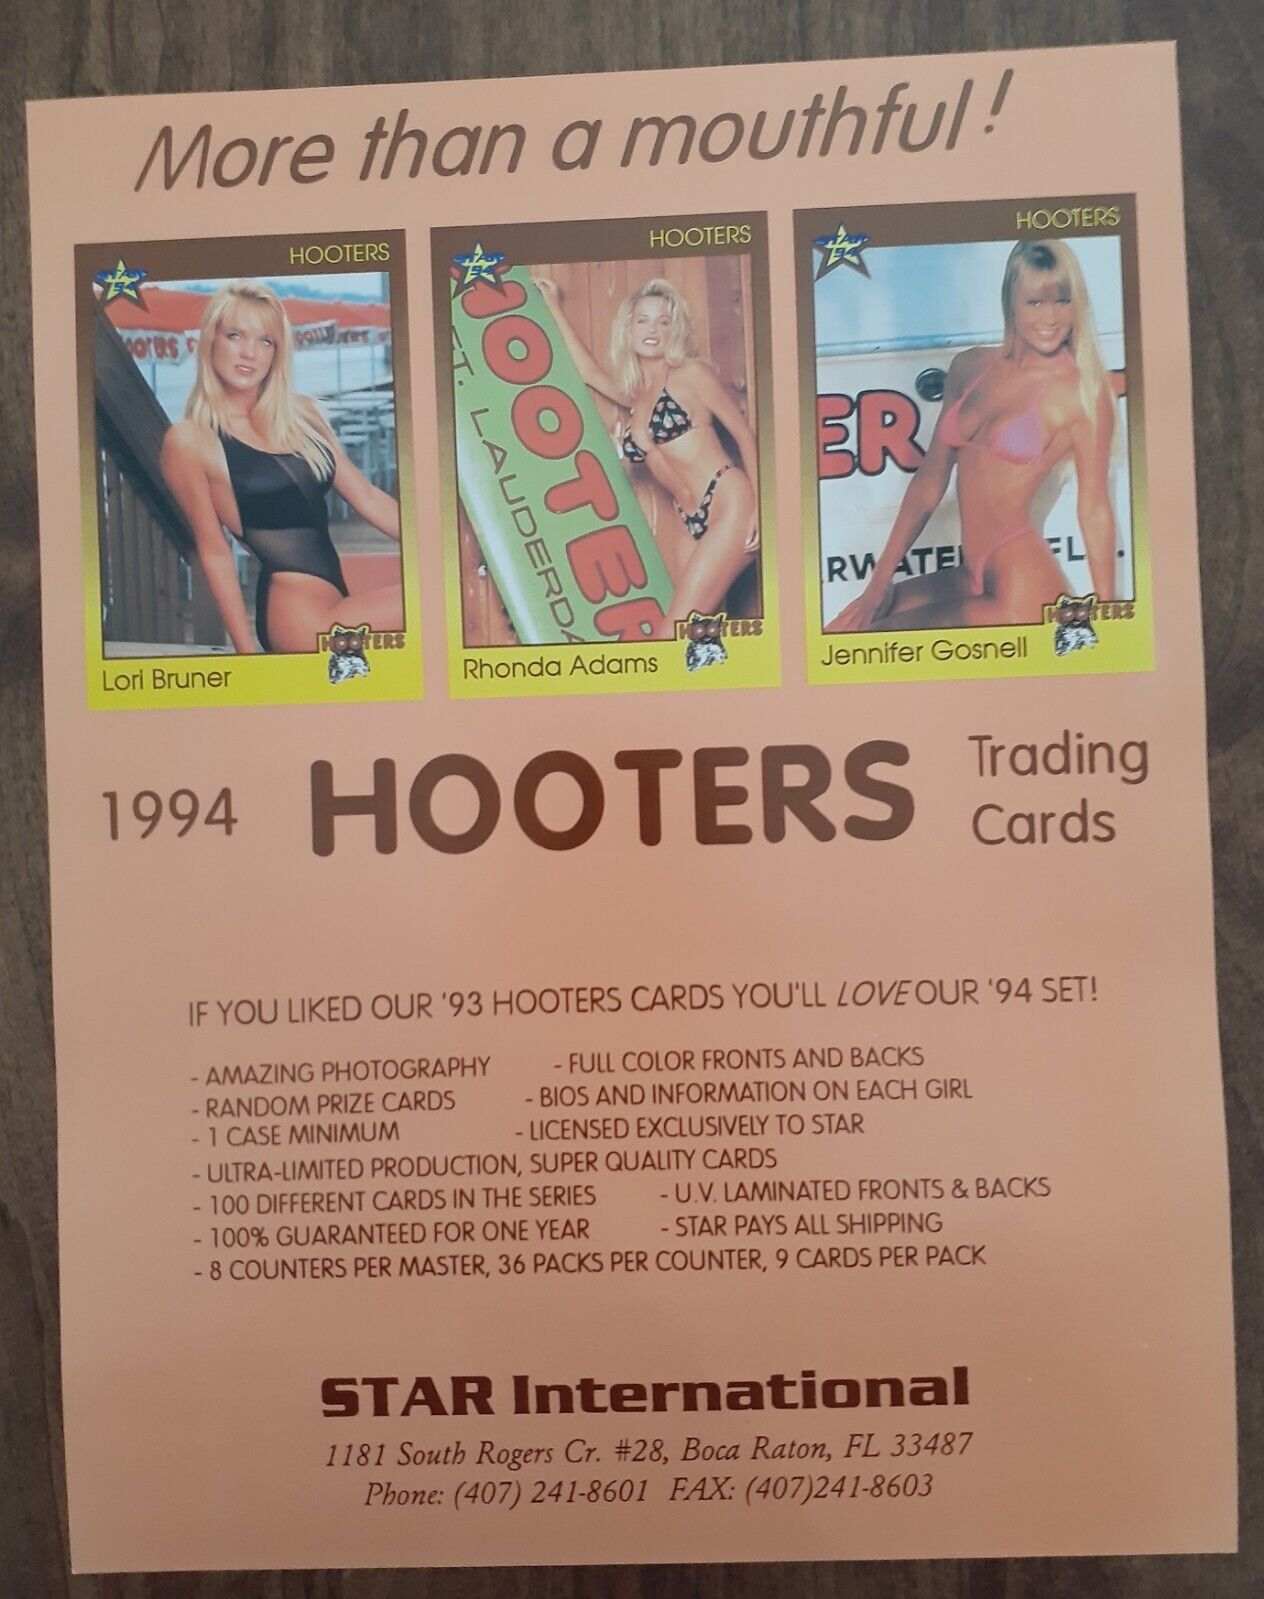 Promo Sell Sheet - HOOTERS 1994 Collection Trading Cards - More Than A Mouthful